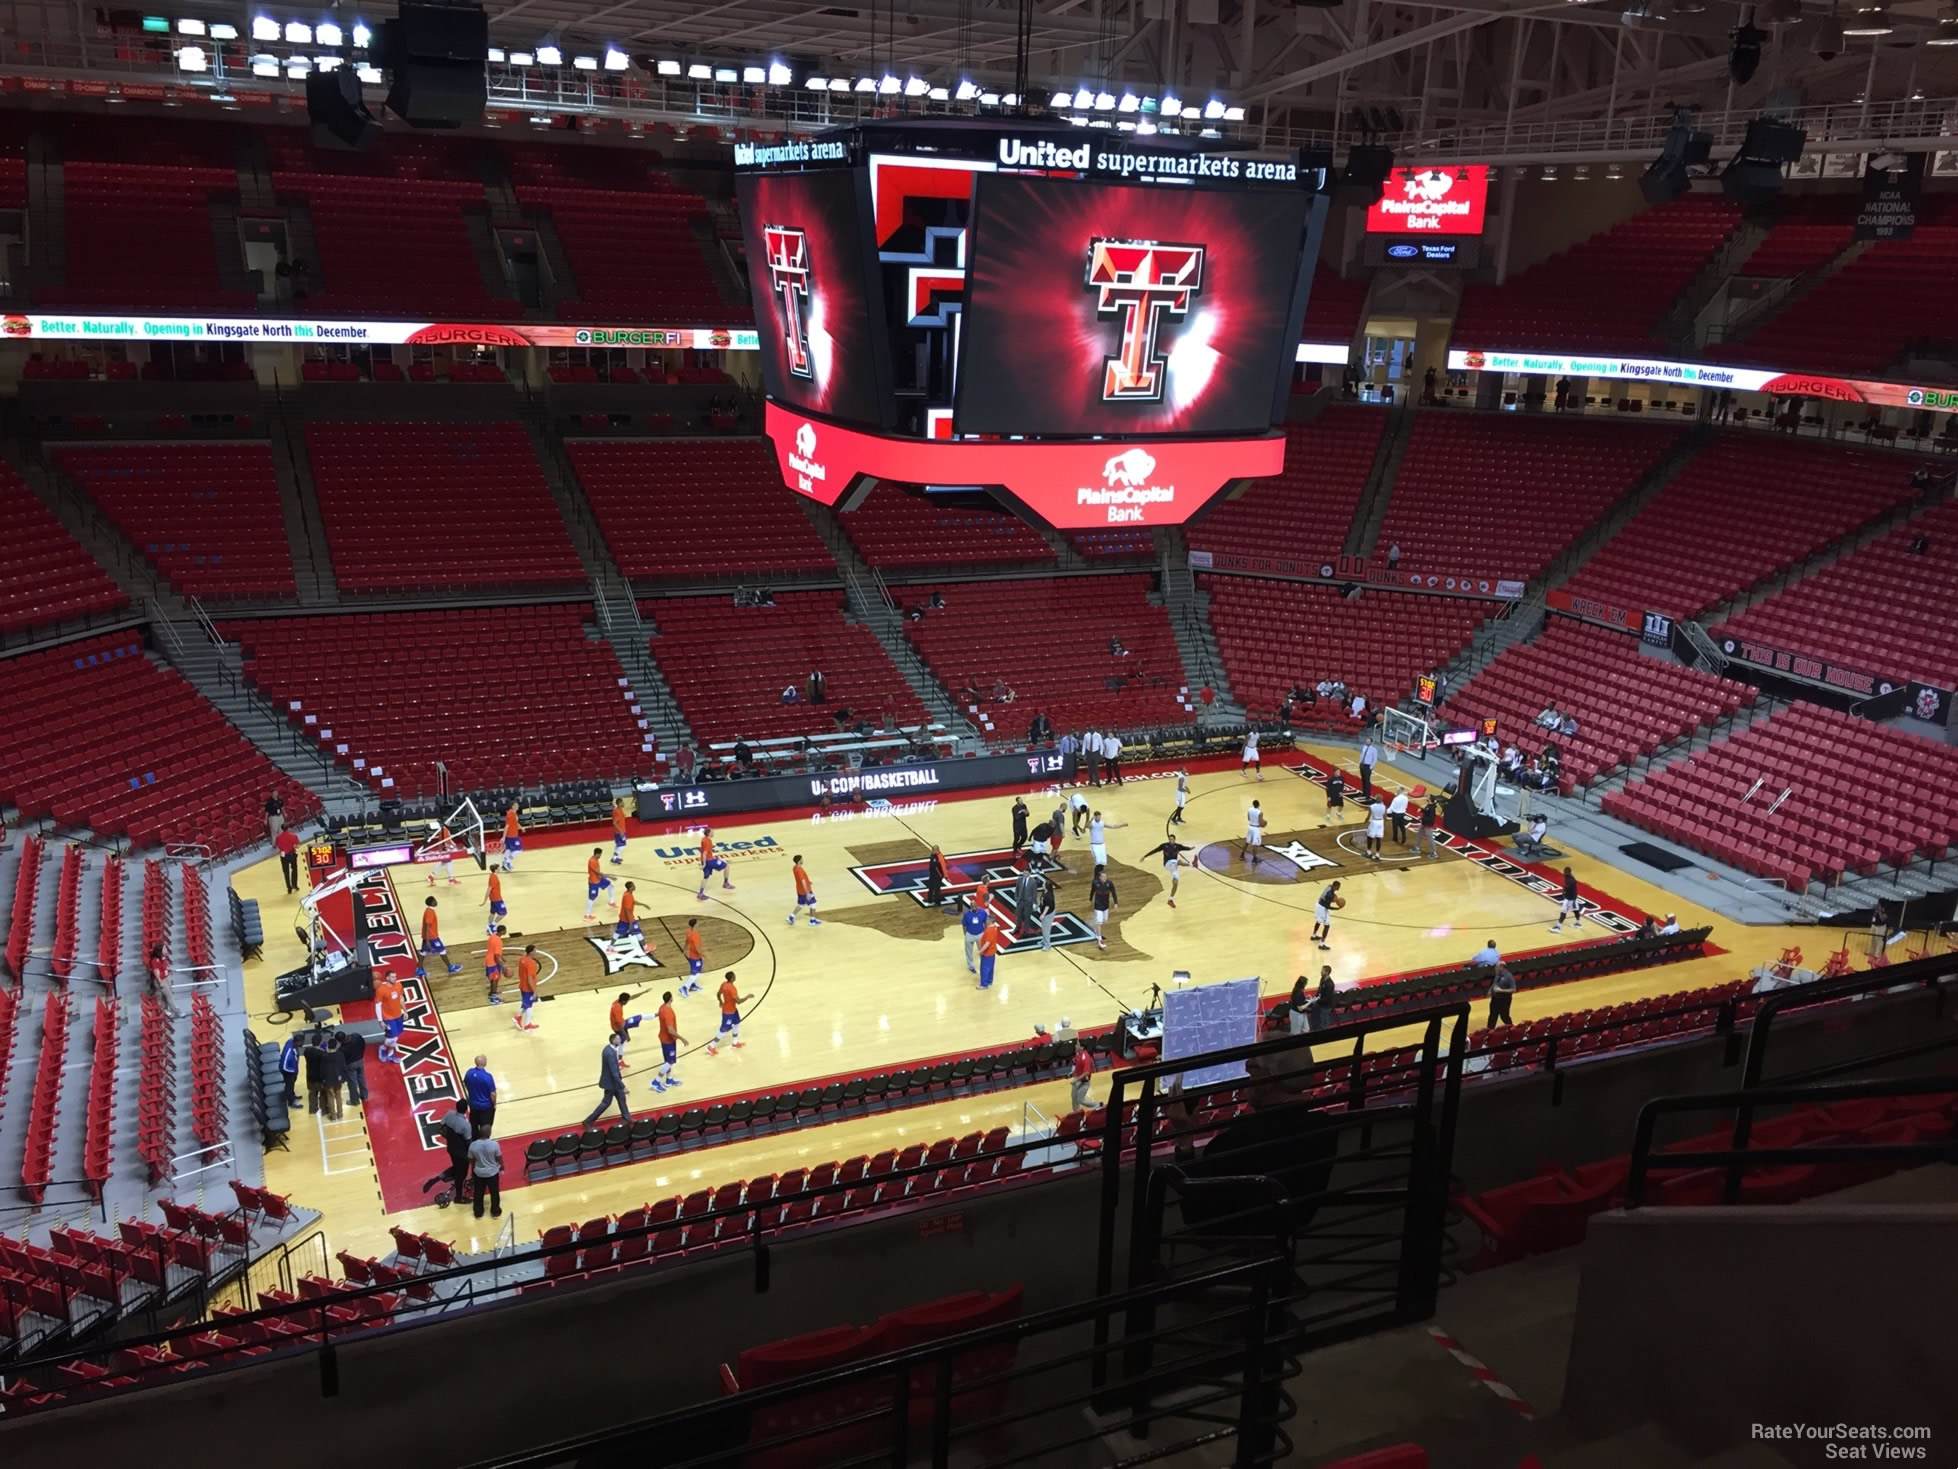 section 203, row 7 seat view  - united supermarkets arena